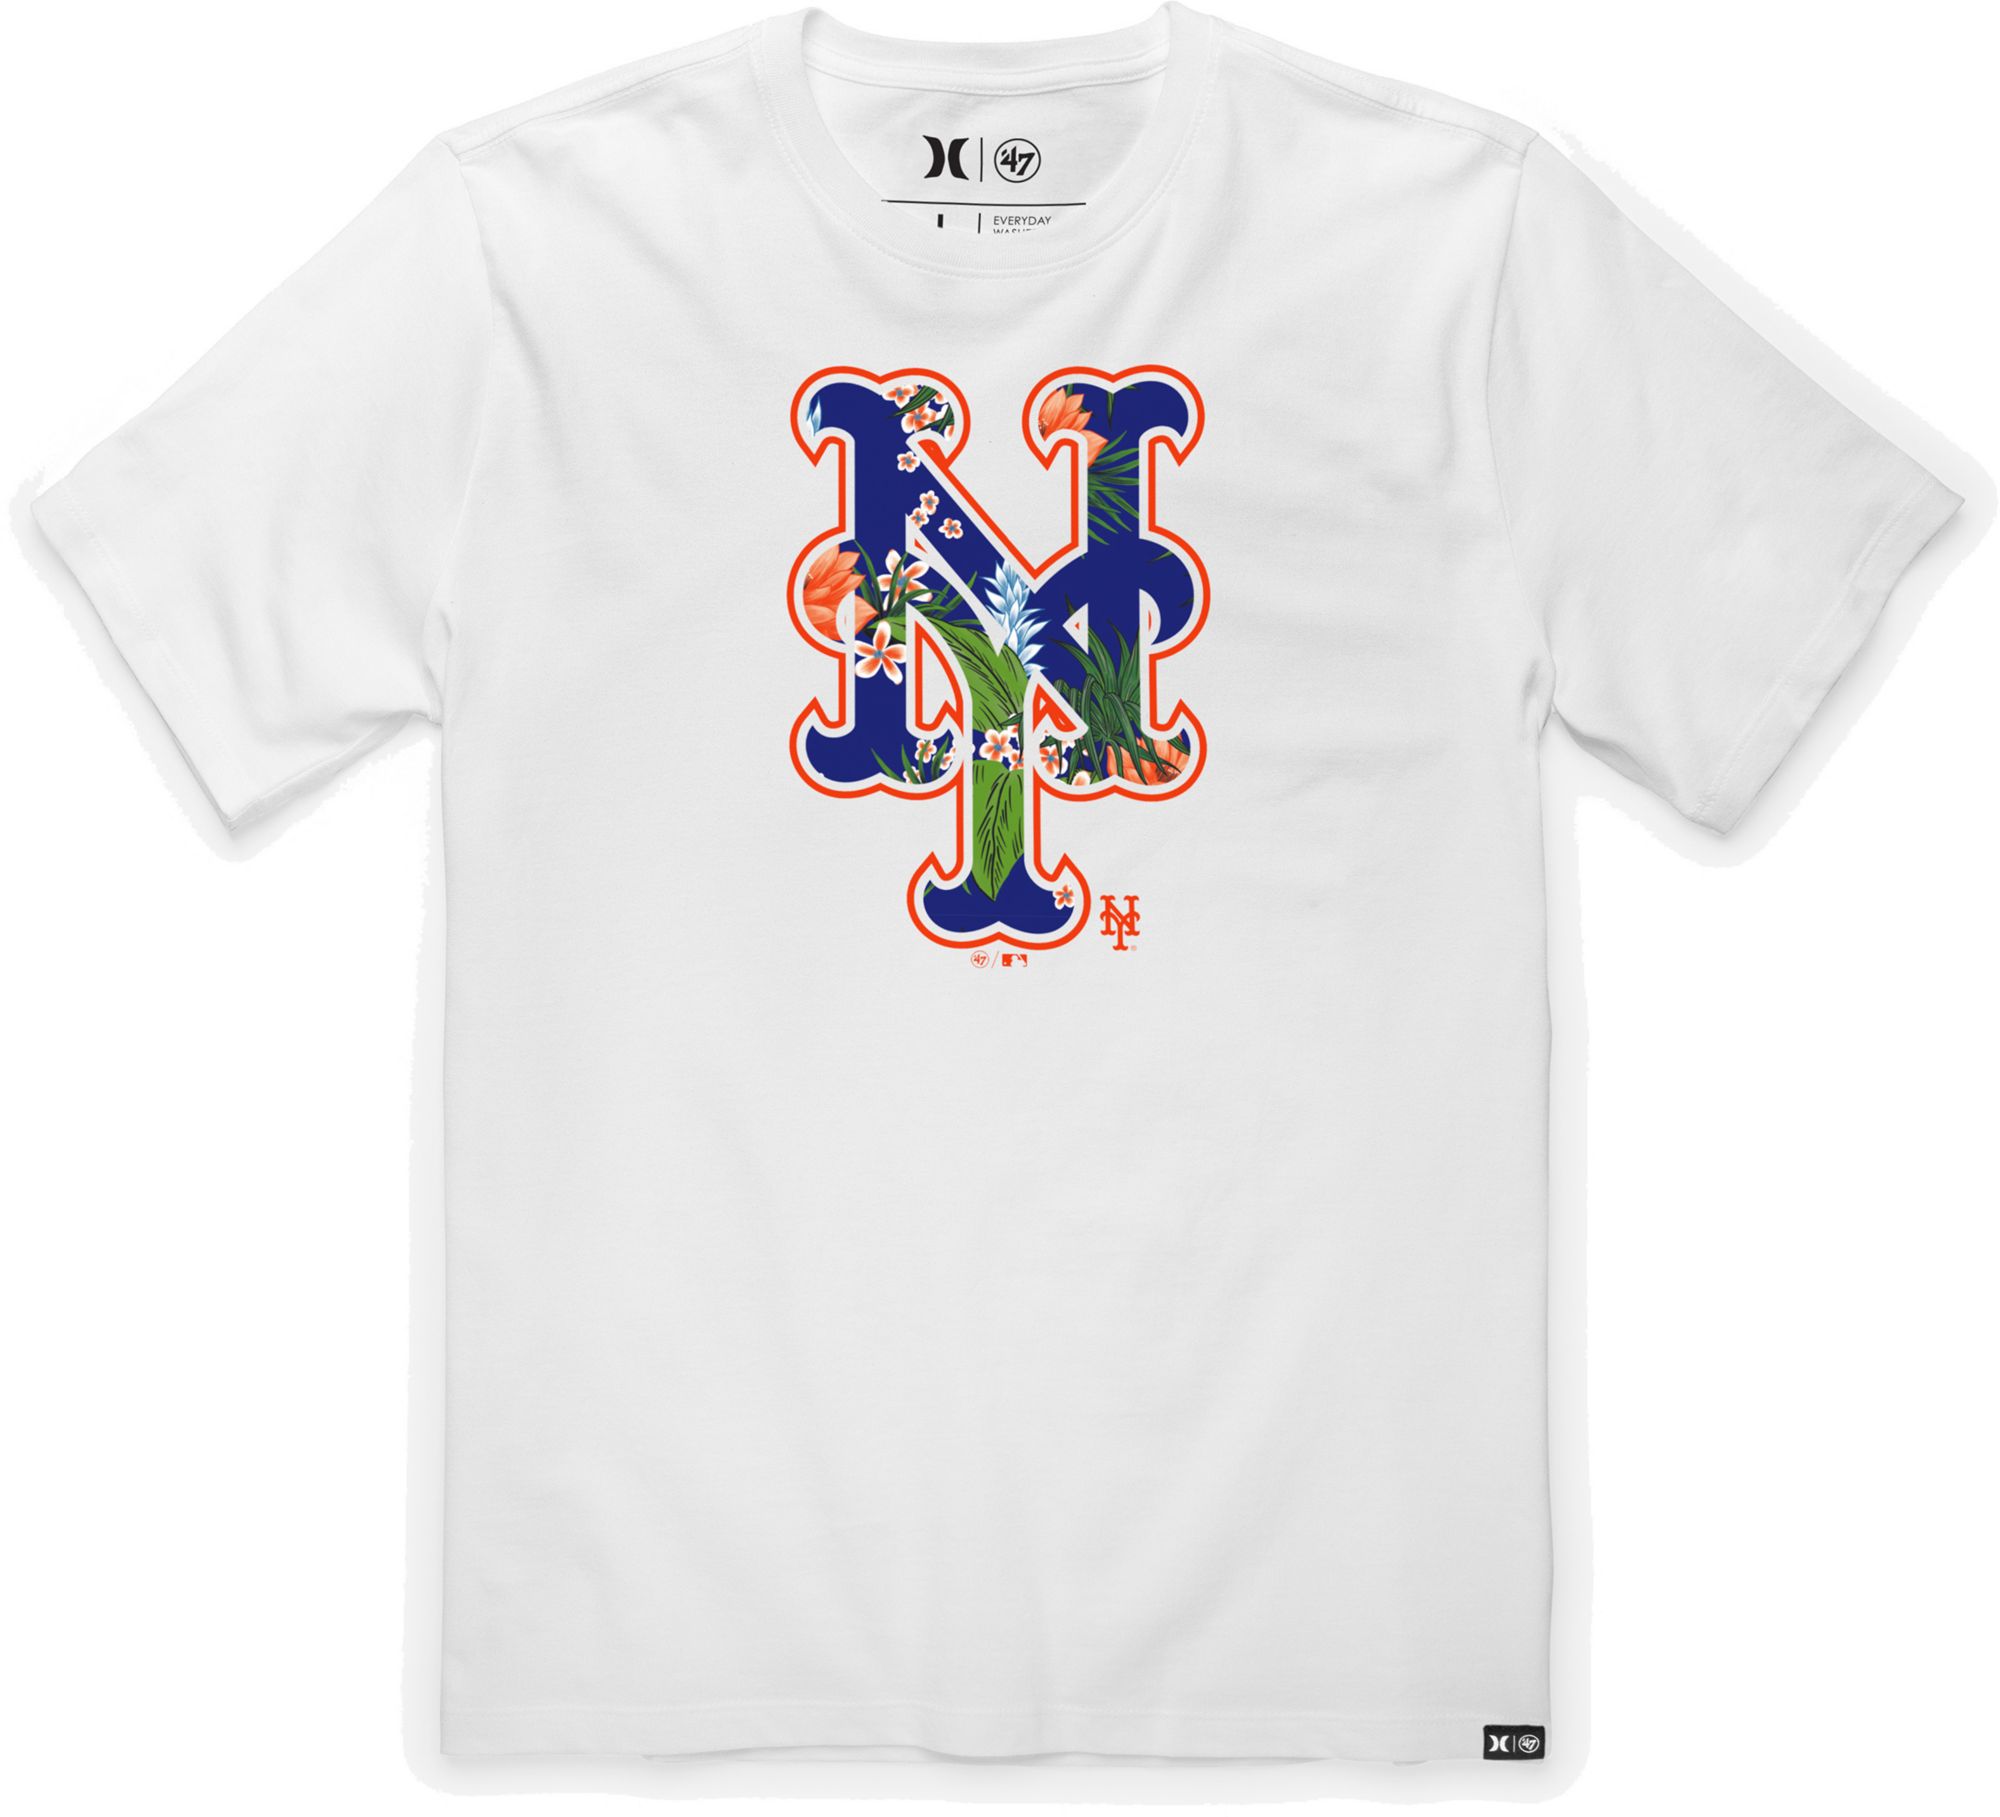 New York Mets Women's Apparel  Curbside Pickup Available at DICK'S